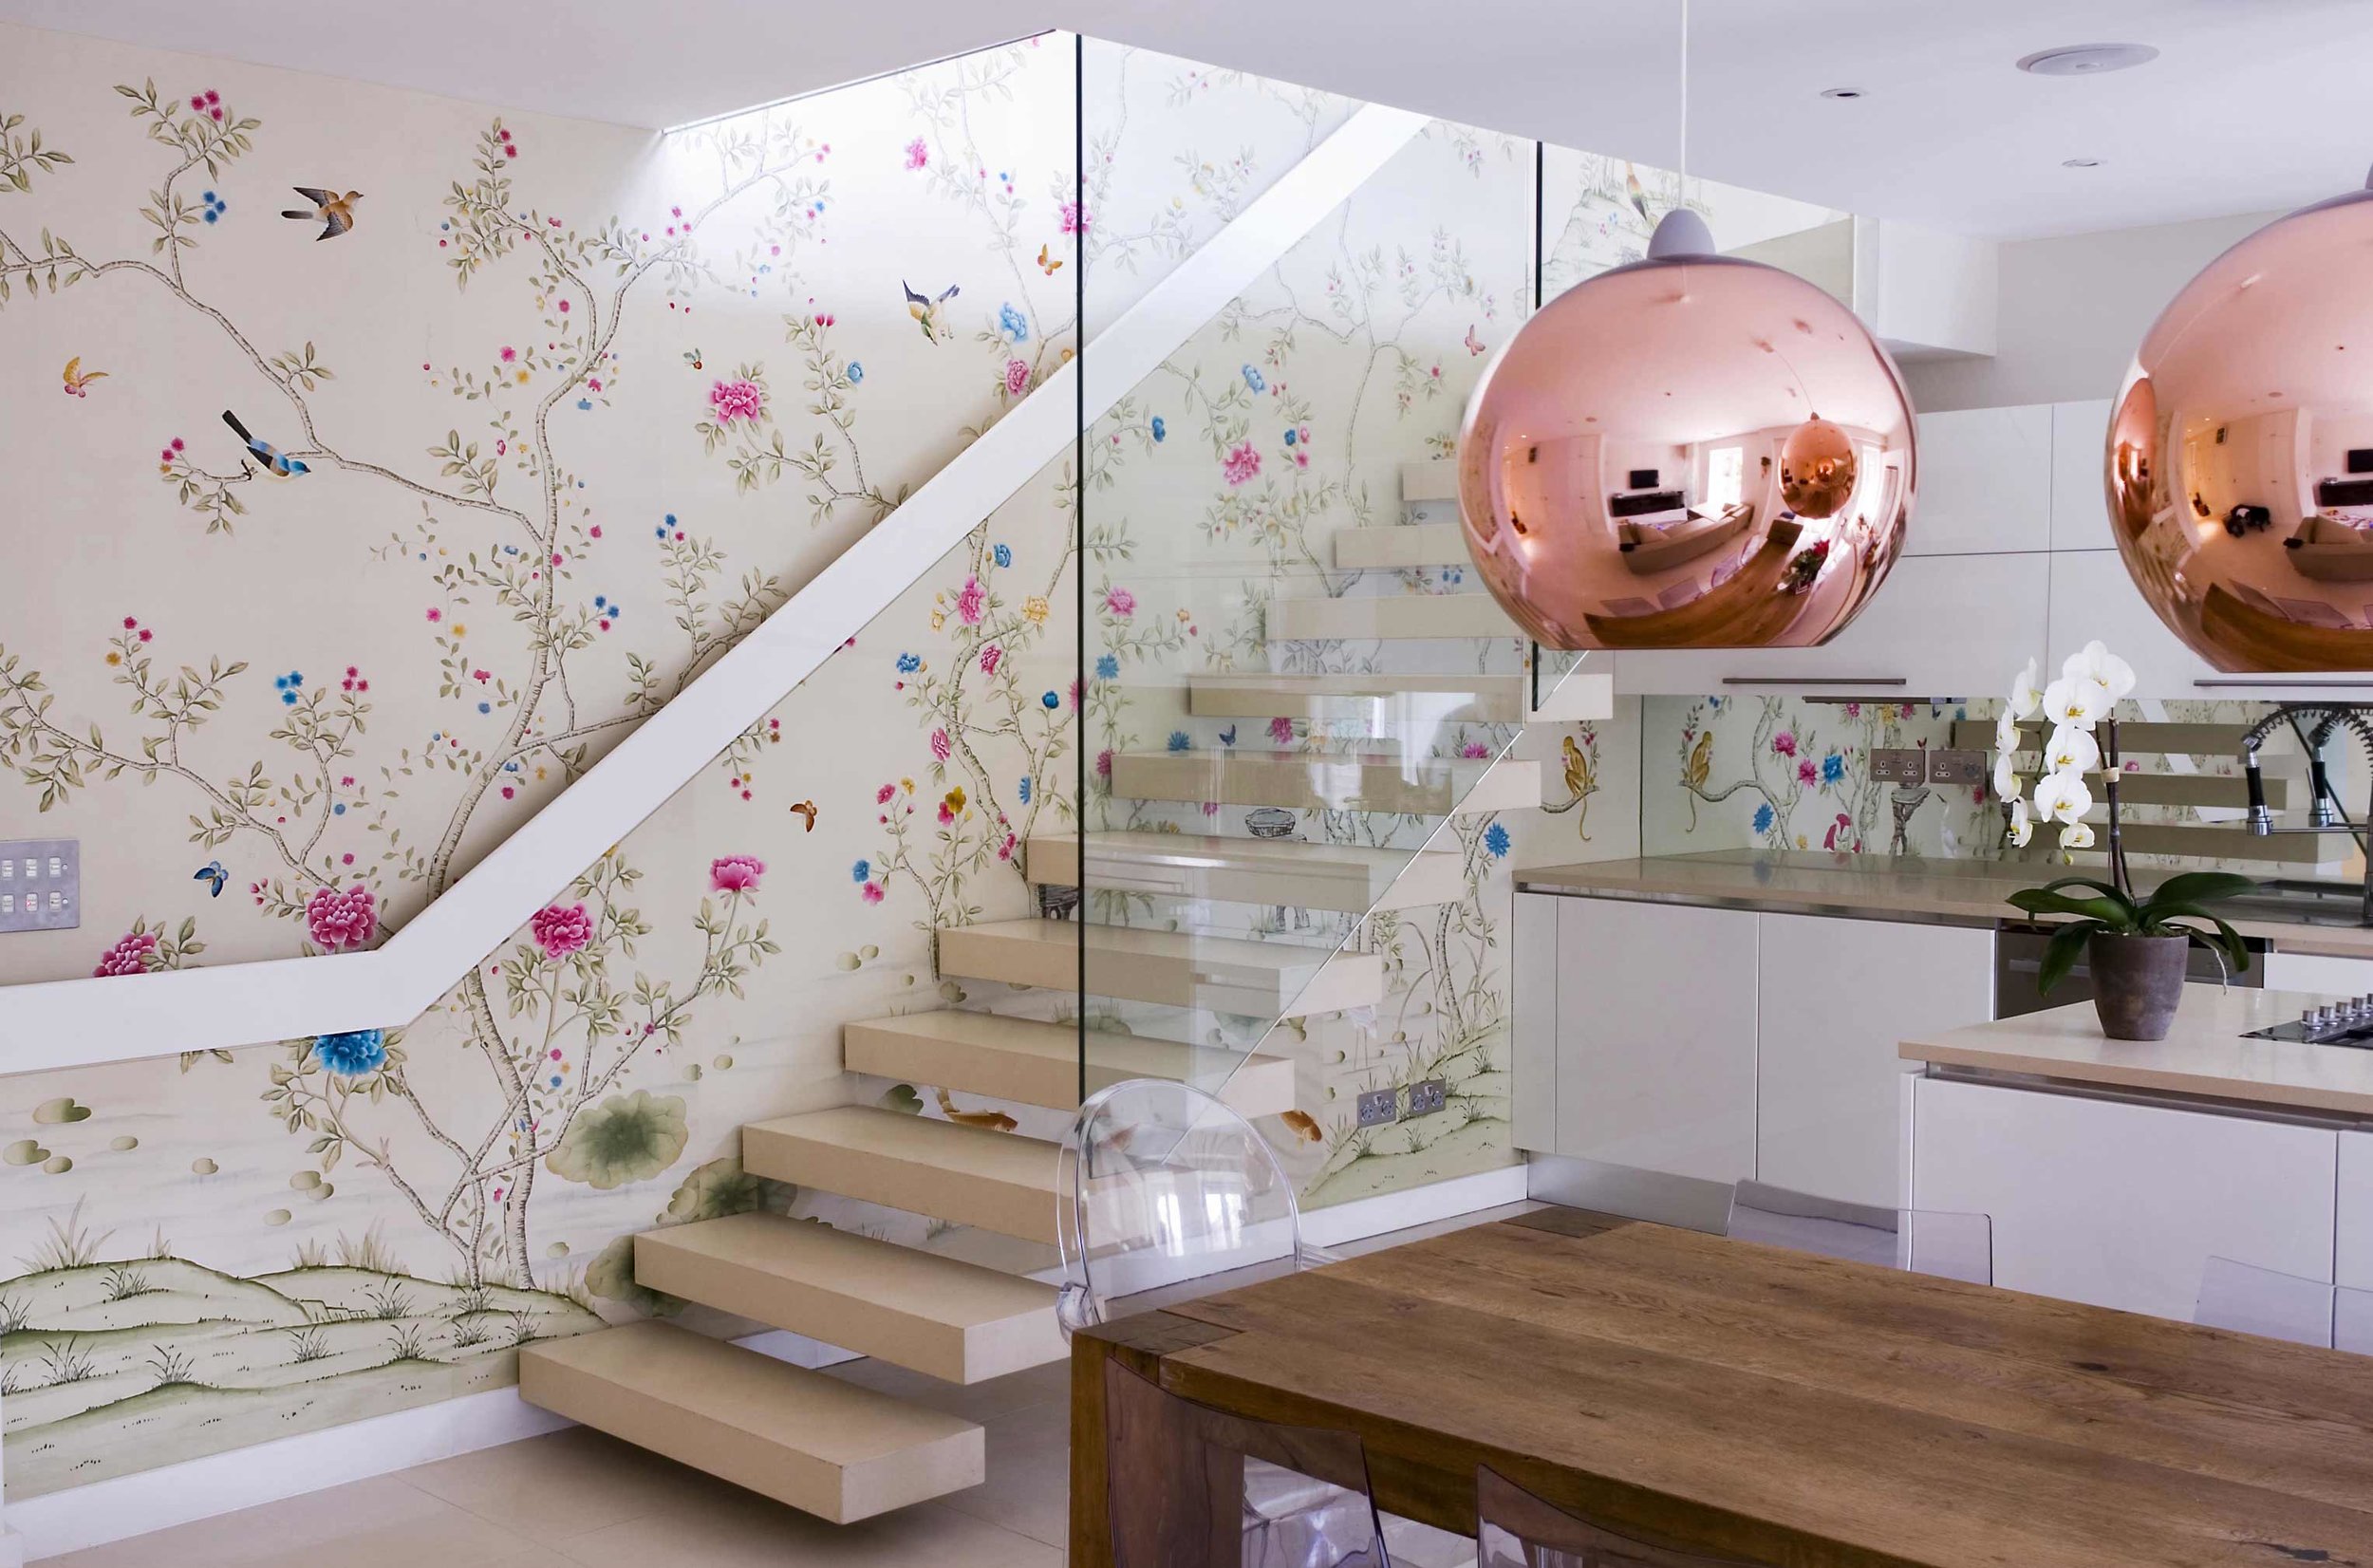 To-die-for kitchen (though that would defeat the whole purpose) with Fromental wallpaper